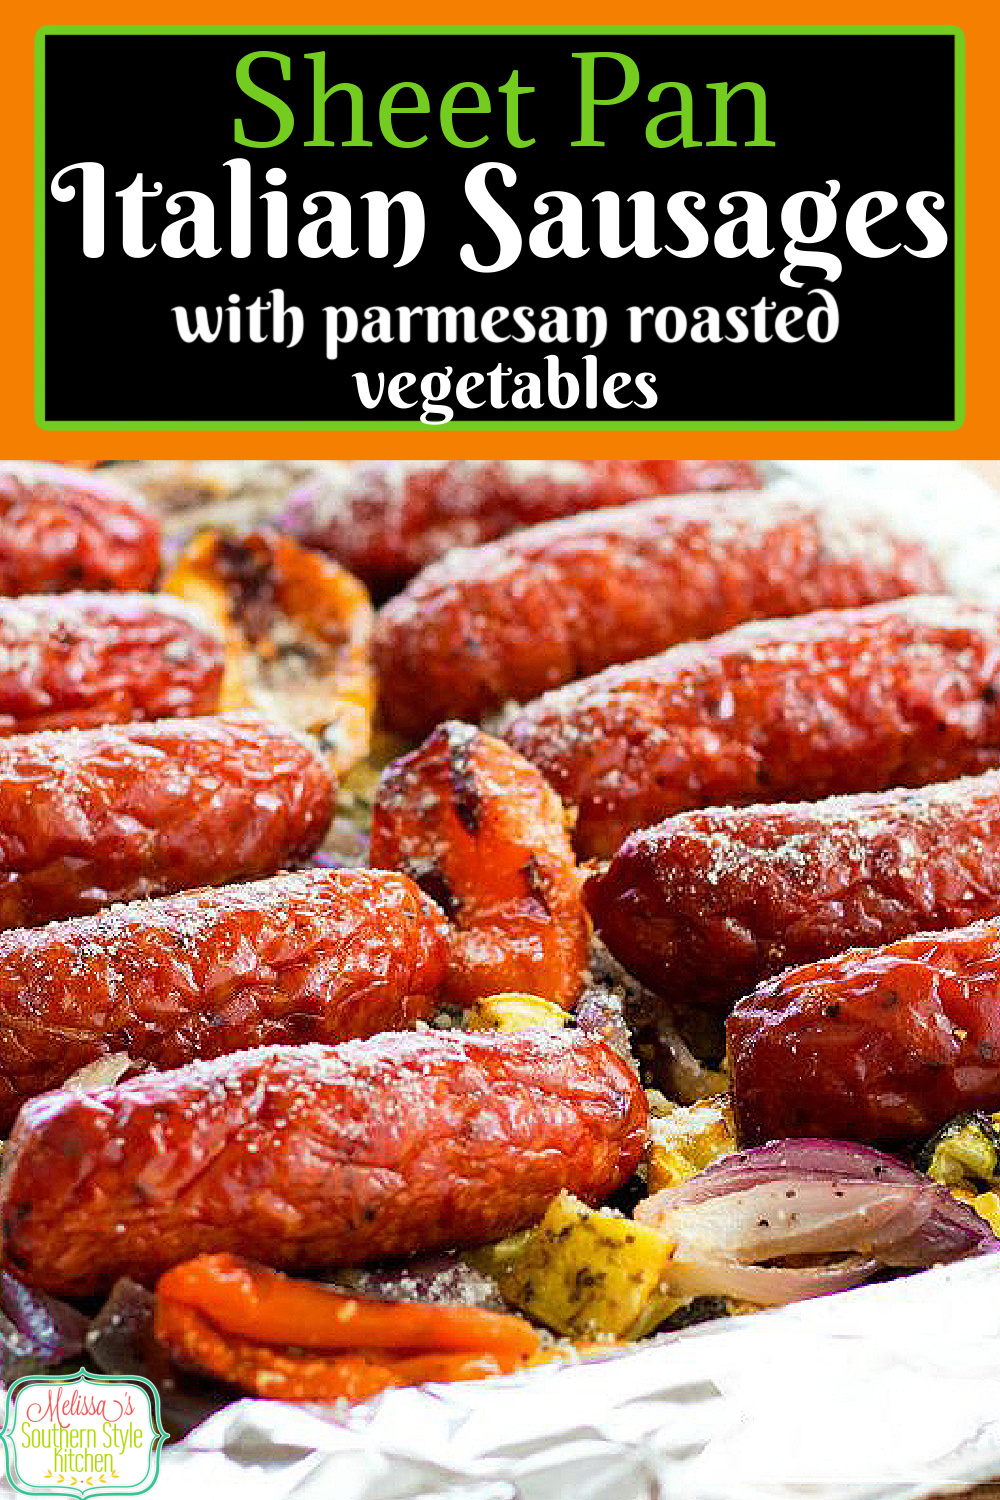 Make the entire meal on a sheet pan for a low stress all-in-one meal #sheetpanmeals #italaiansausages #roastedvegetables #sheetpanrecipes #dinnerideas #Italian #roastedsquash #dinner #southernfood #southernrecipes via @melissasssk